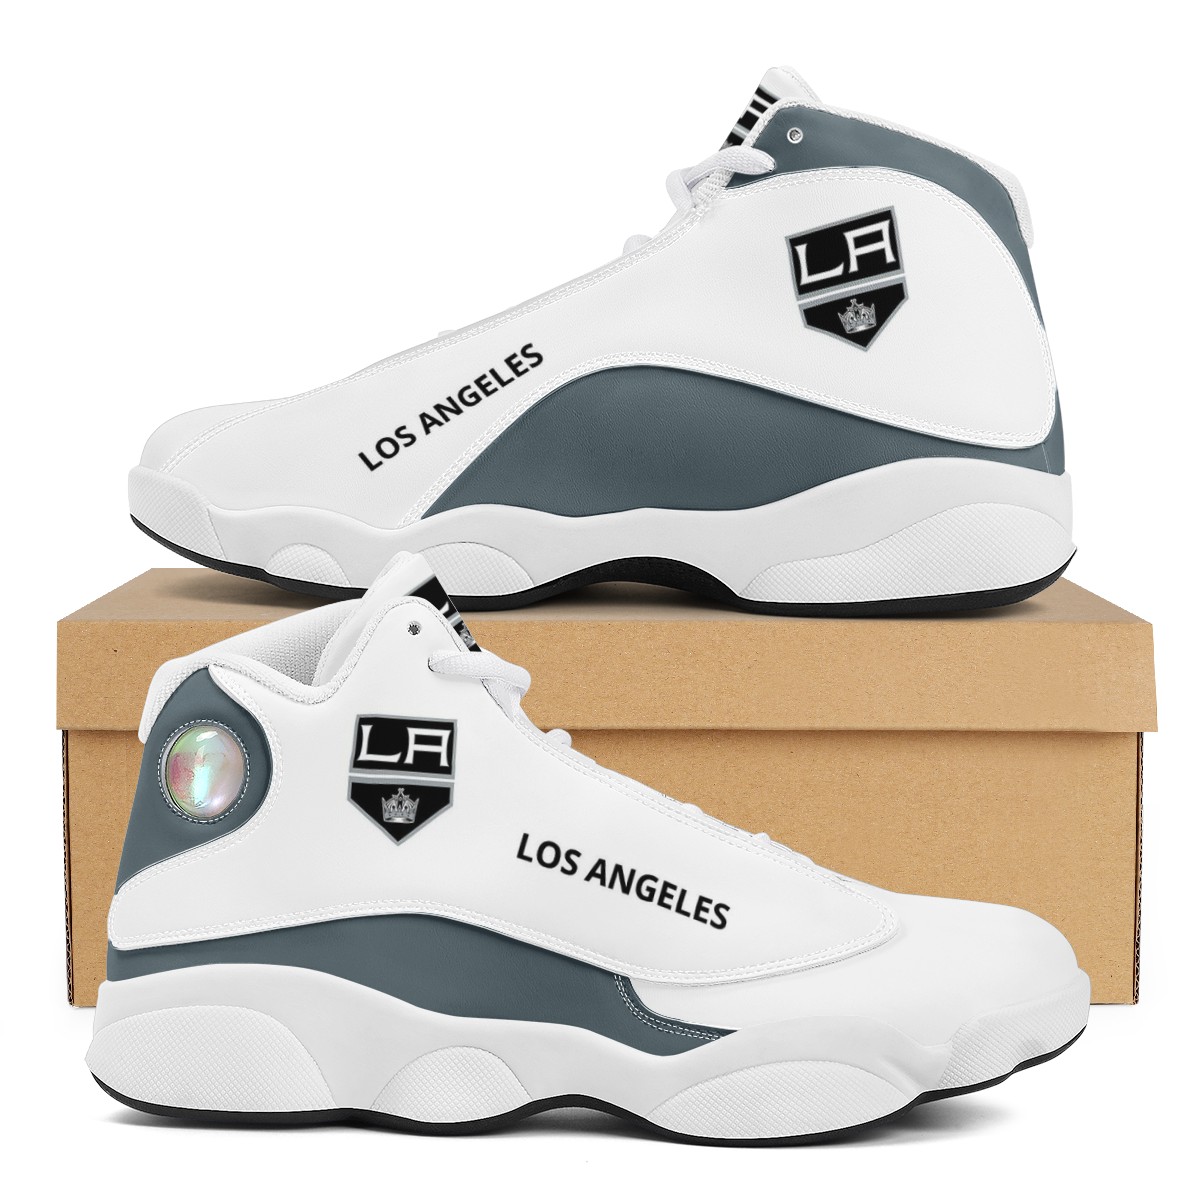 Women's Los Angeles Kings Limited Edition JD13 Sneakers 001